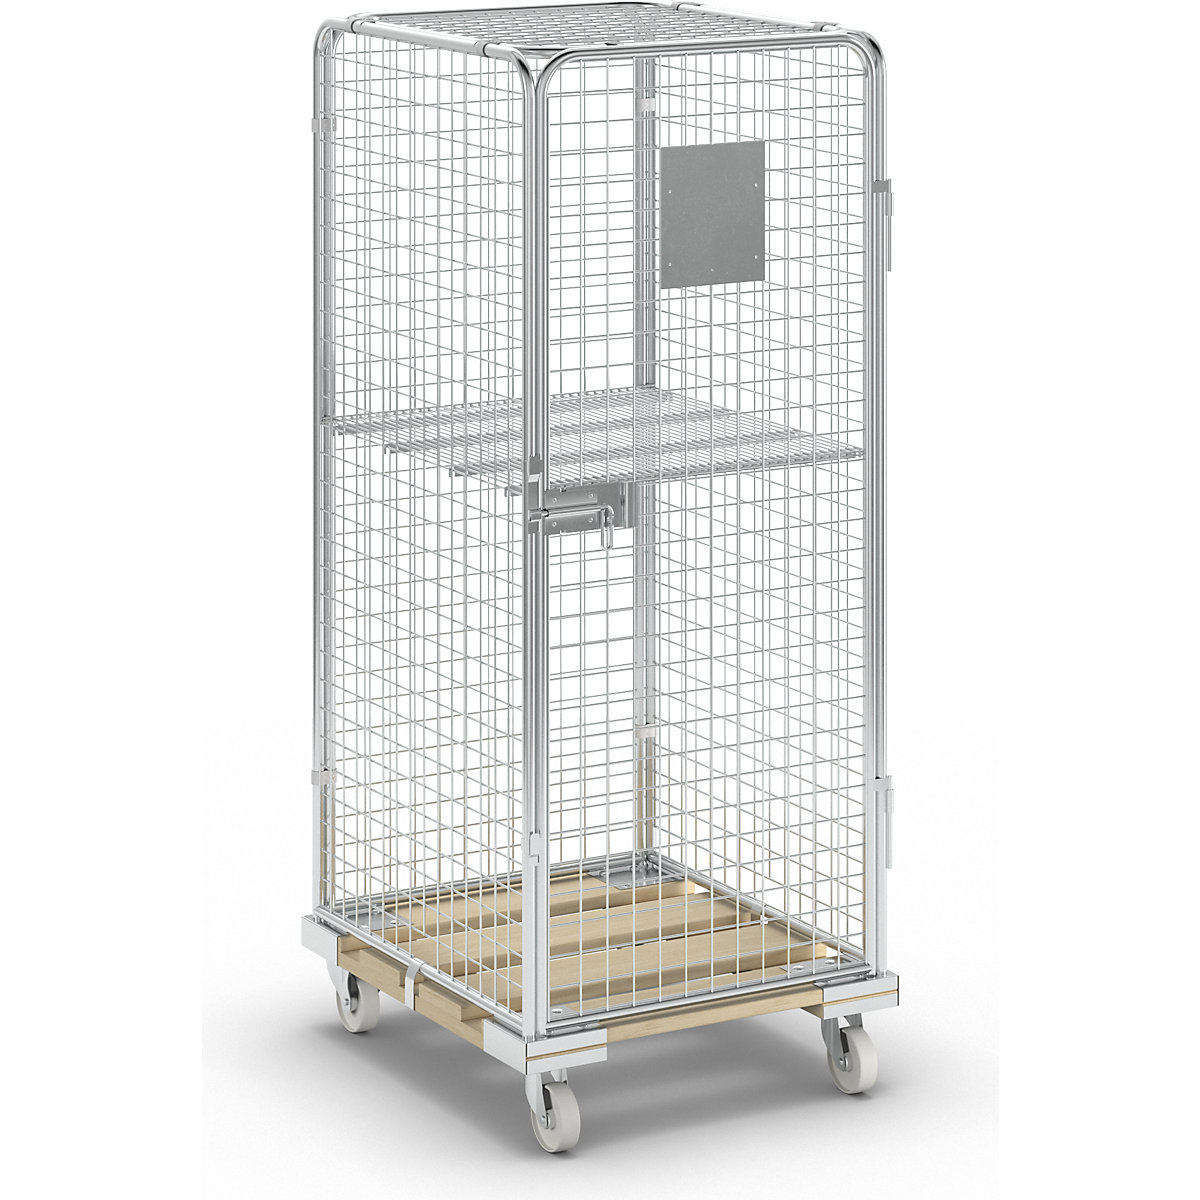 Security roll container with wooden dolly, effective height 1585 mm, with 1 door, 1 wire mesh intermediate shelf-13